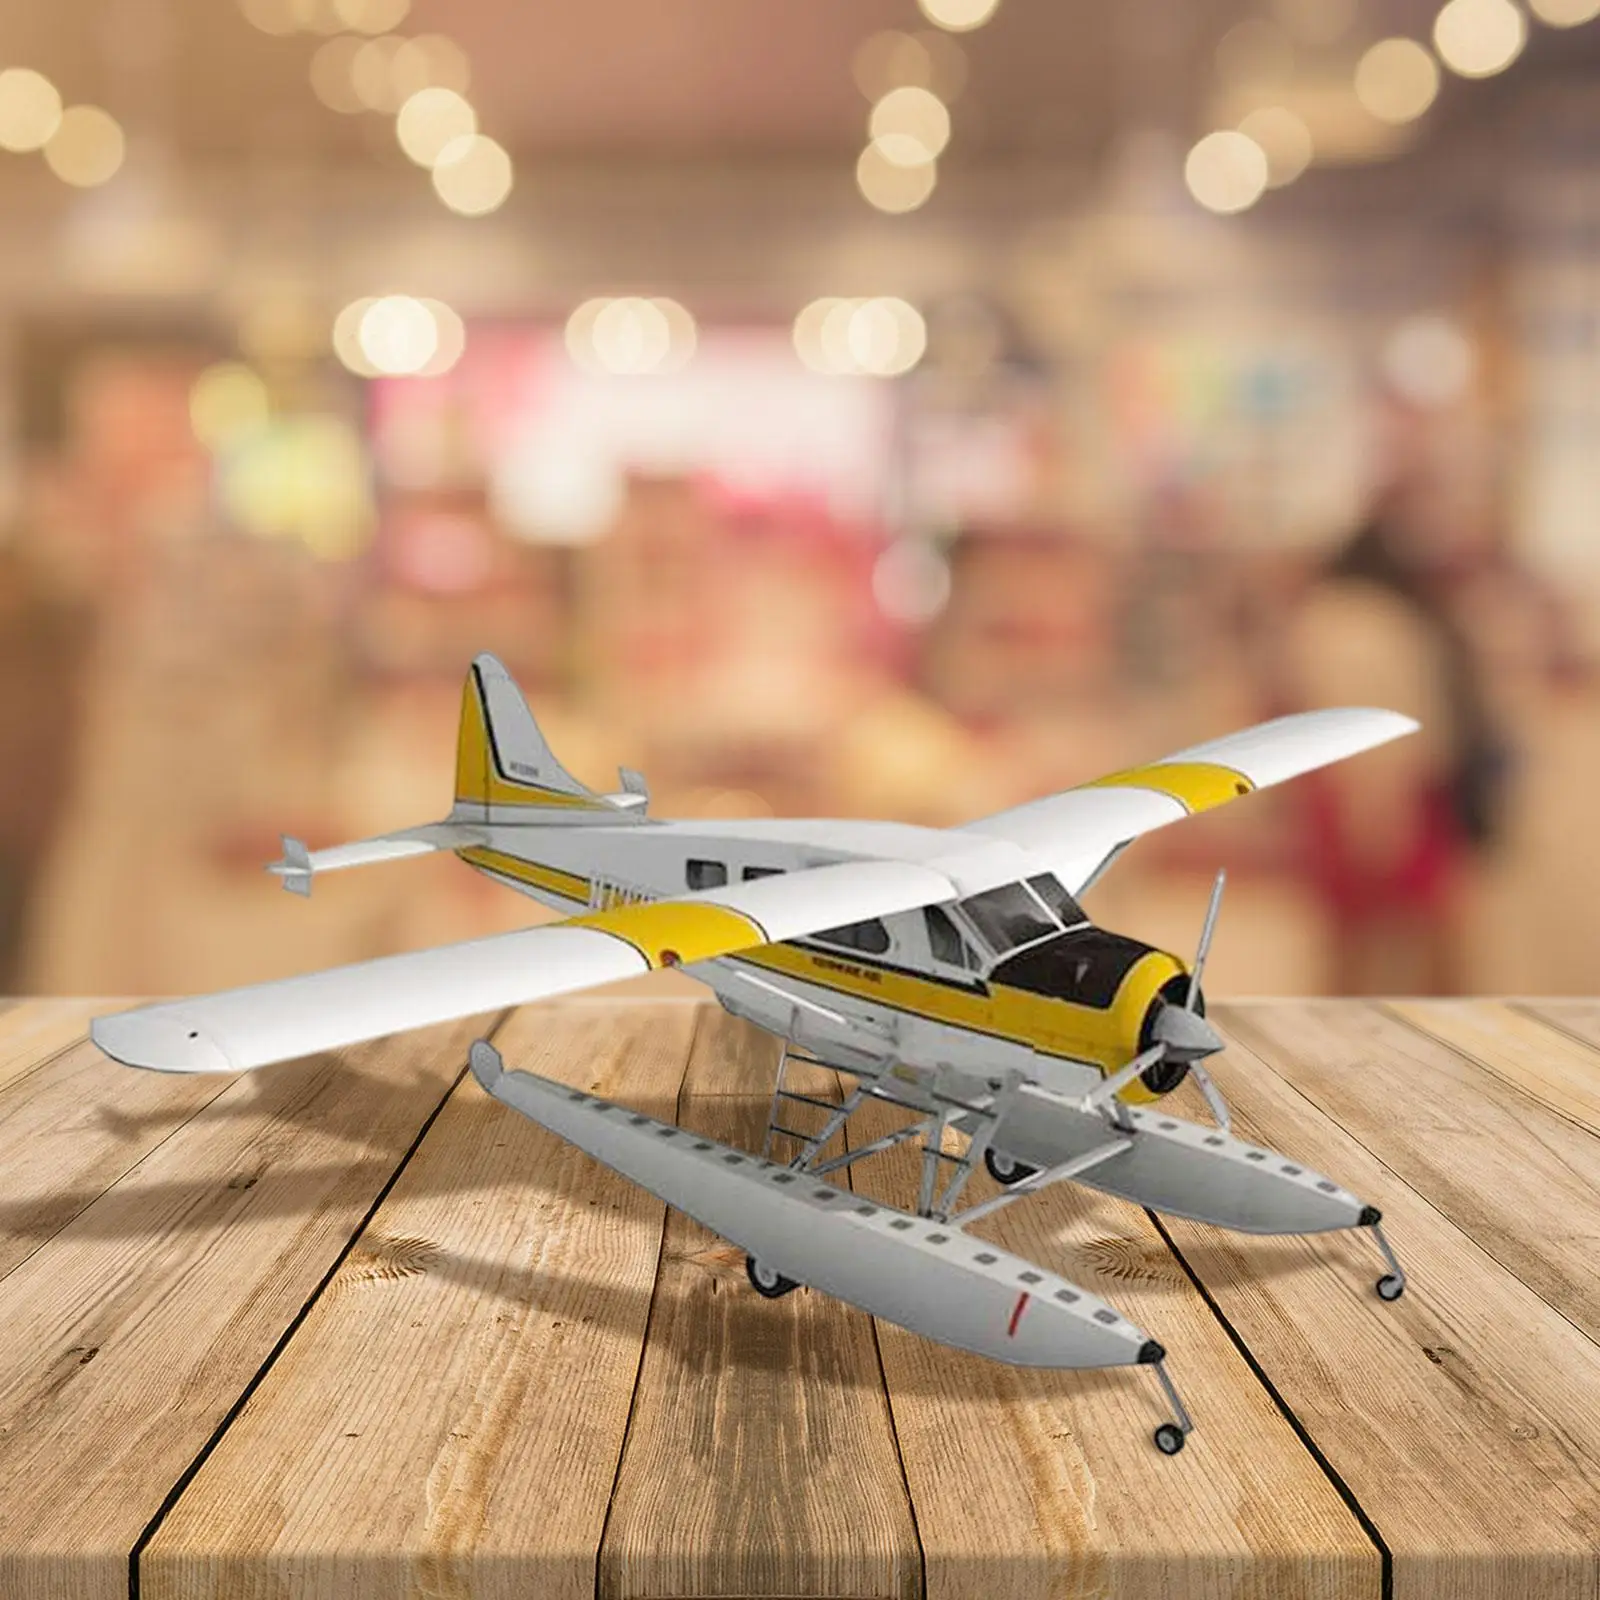 1:32 Scale Float Seaplane Model Educational Craft Collections Desk Decoration DIY Airplane Craft for Men Women Adults Kids